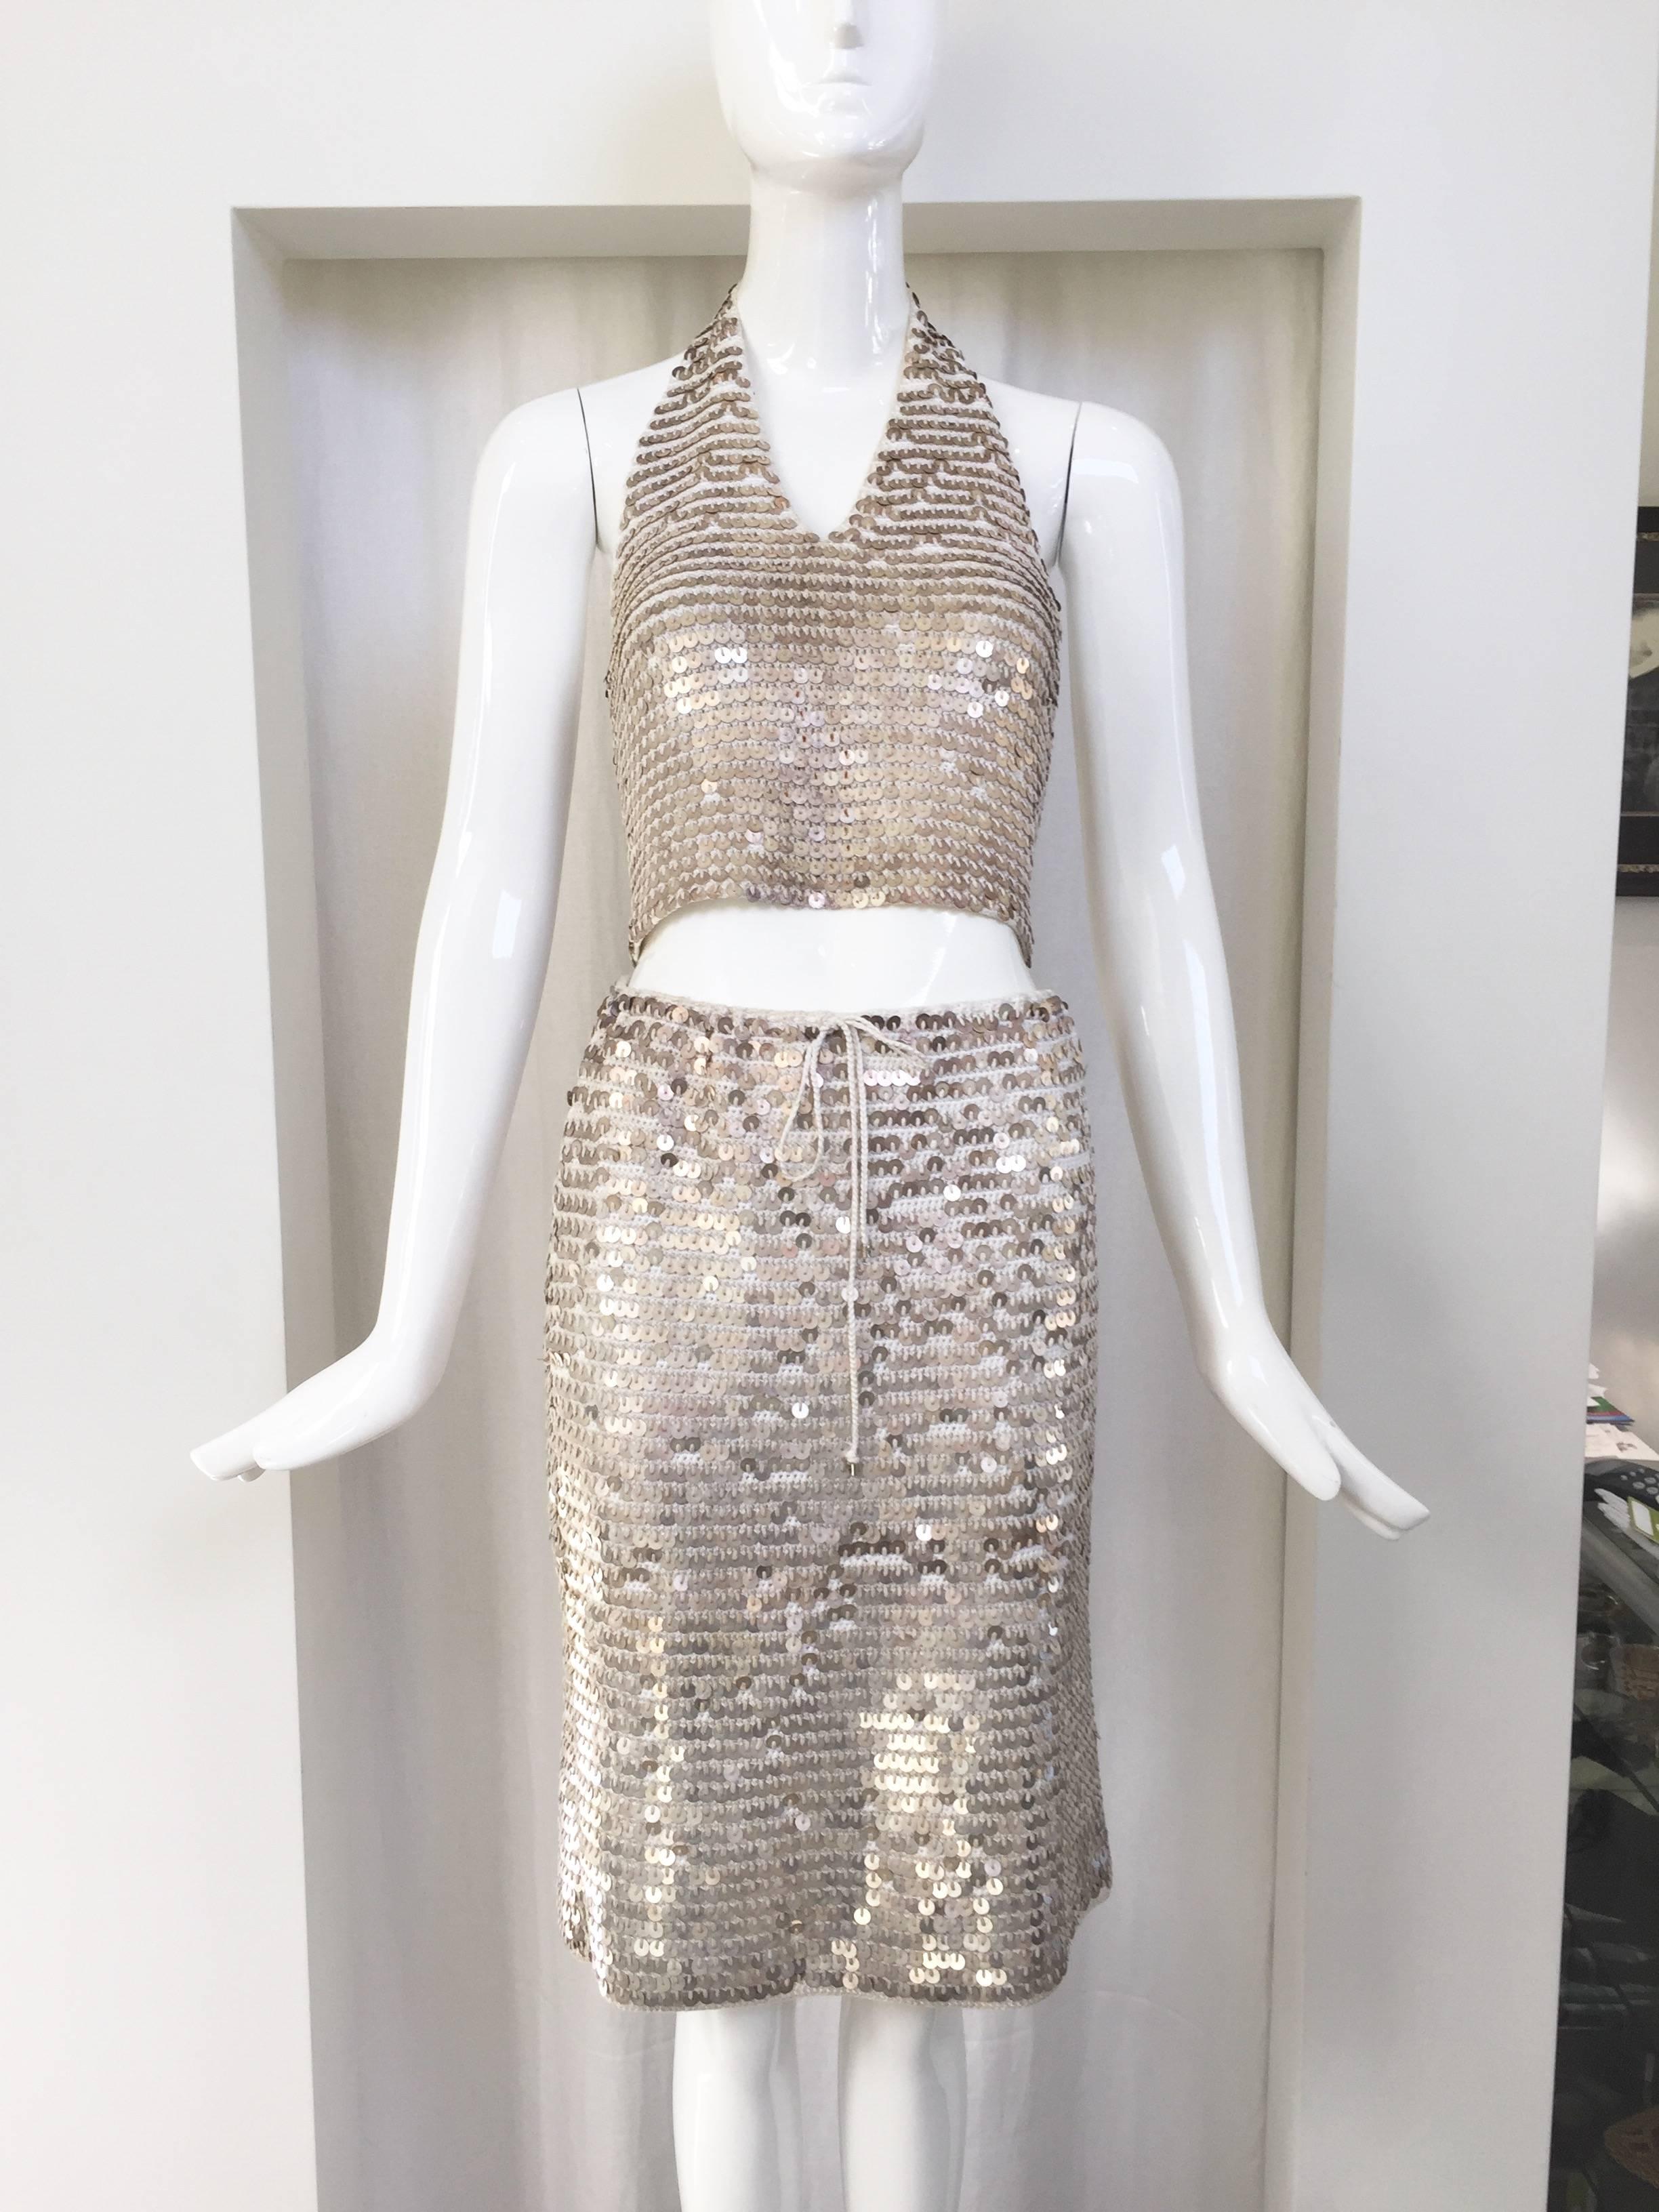 From Spring 2000 runway collection (see image) 
Halter cotton top  and skirt set with metal sequin.

Size : 38. Fit size 2,4  US size.

Drawstring skirt.